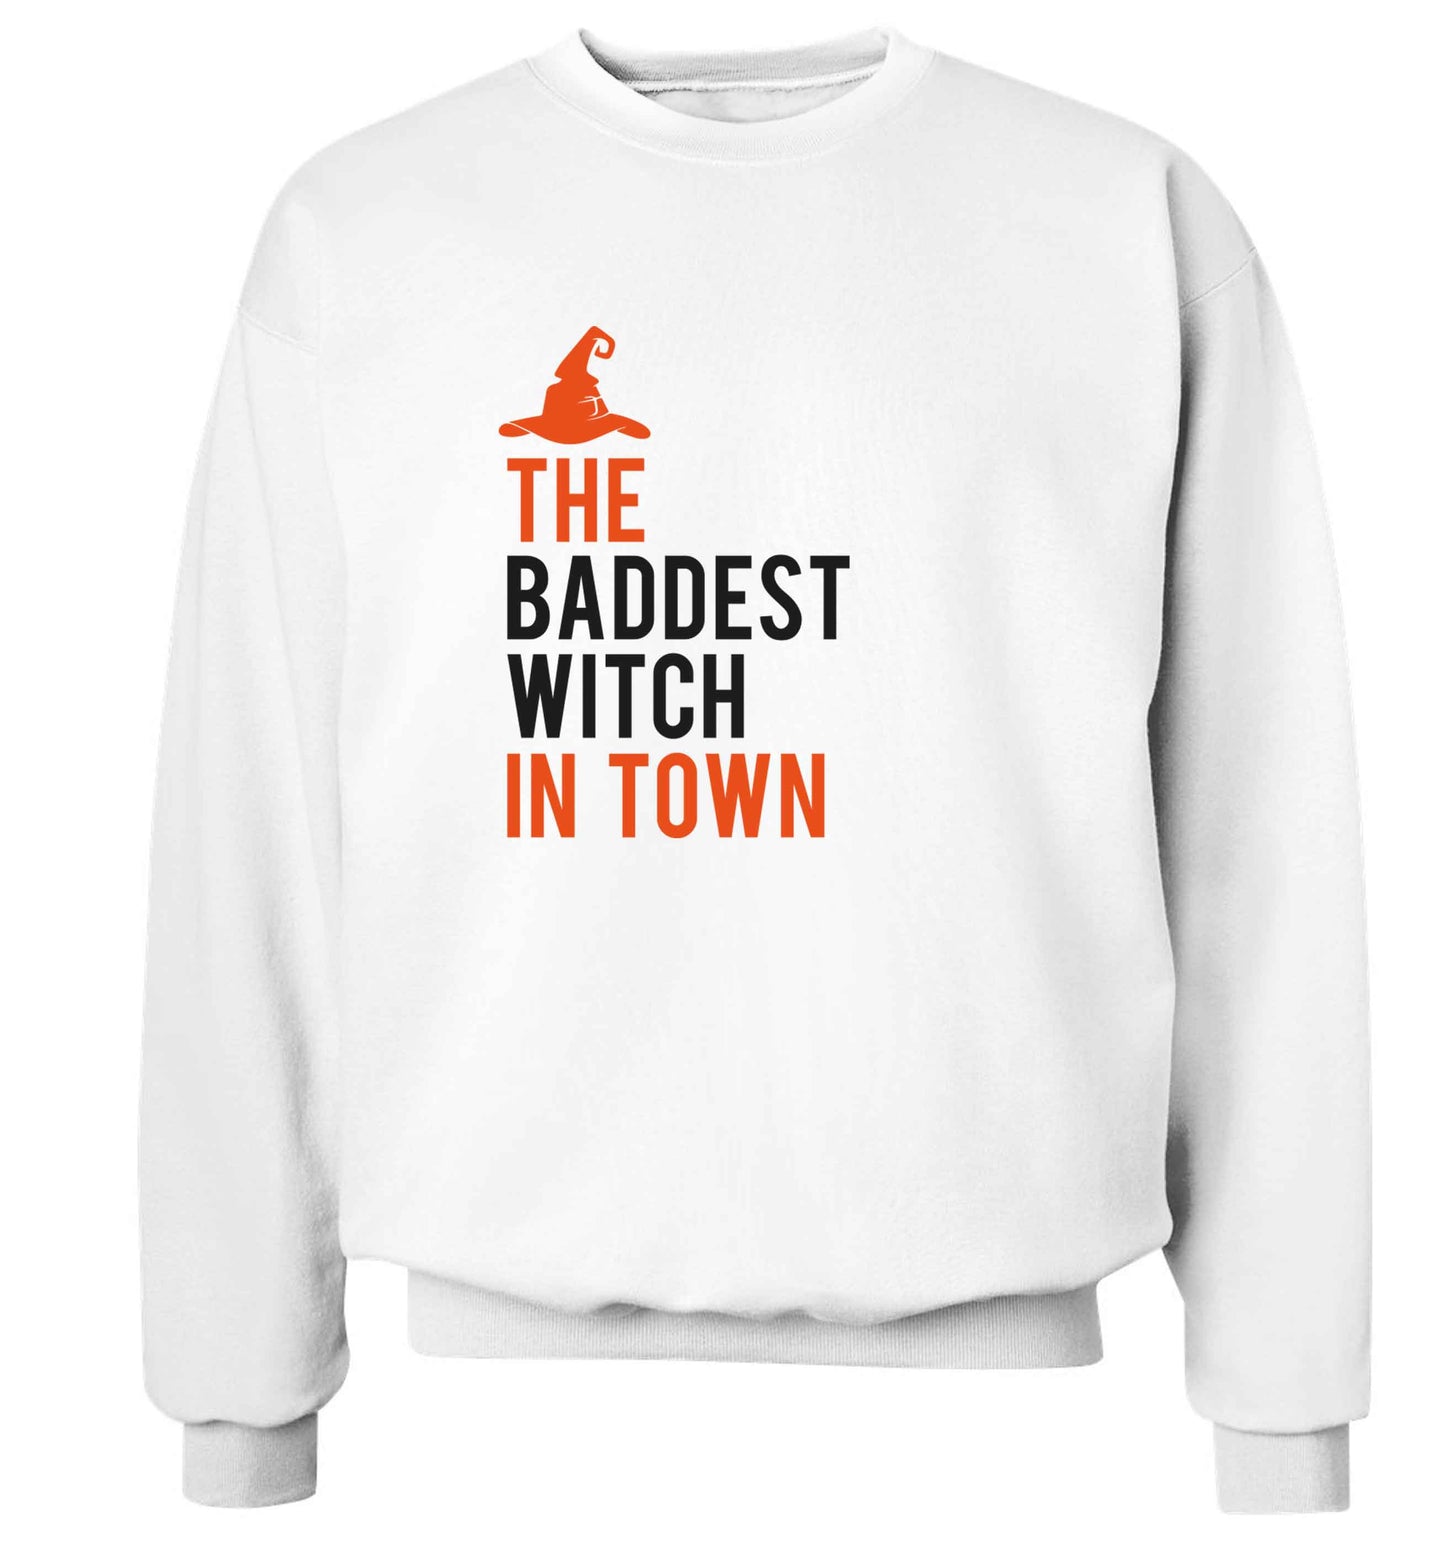 Badest witch in town adult's unisex white sweater 2XL